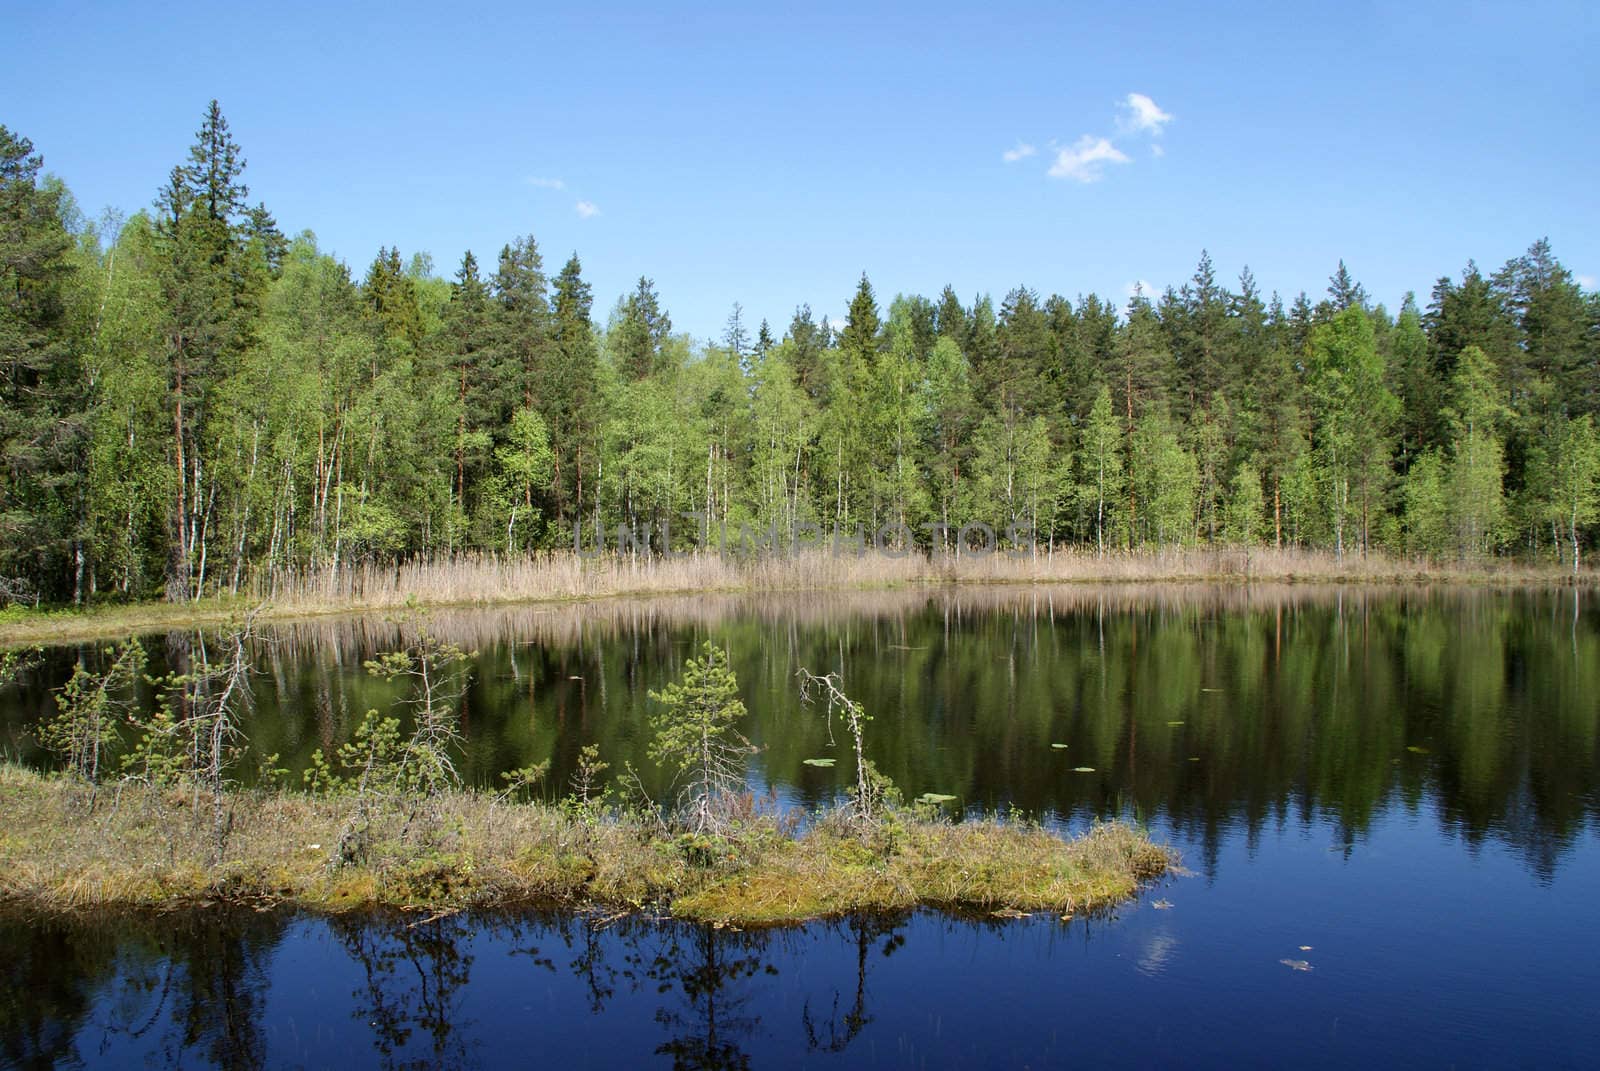 Scenery along the shores of a small rural lake Kolmpera on a sunny day of May in Salo, South of Finland. 